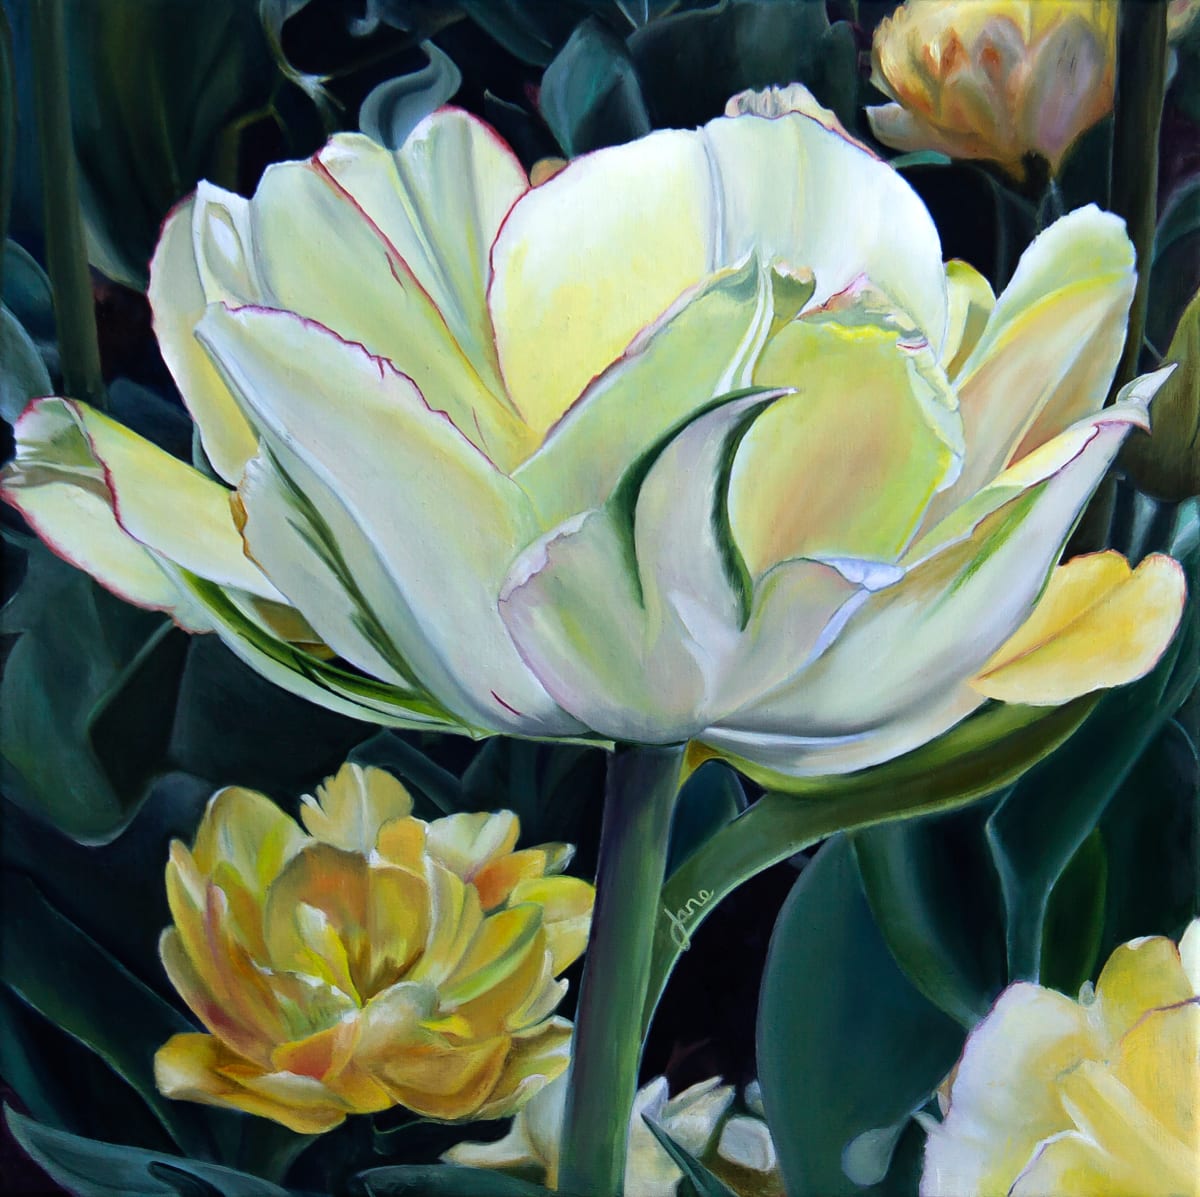 Hello Yellow by Nila Jane Autry  Image: First finished in Black and White, then came this delicate Tulip painting in color.  Vibrant tulips with layers of white and yellow petals are depicted against a dark leafy background. The lighting highlights the delicate edges and subtle color gradients across the flower's petals.